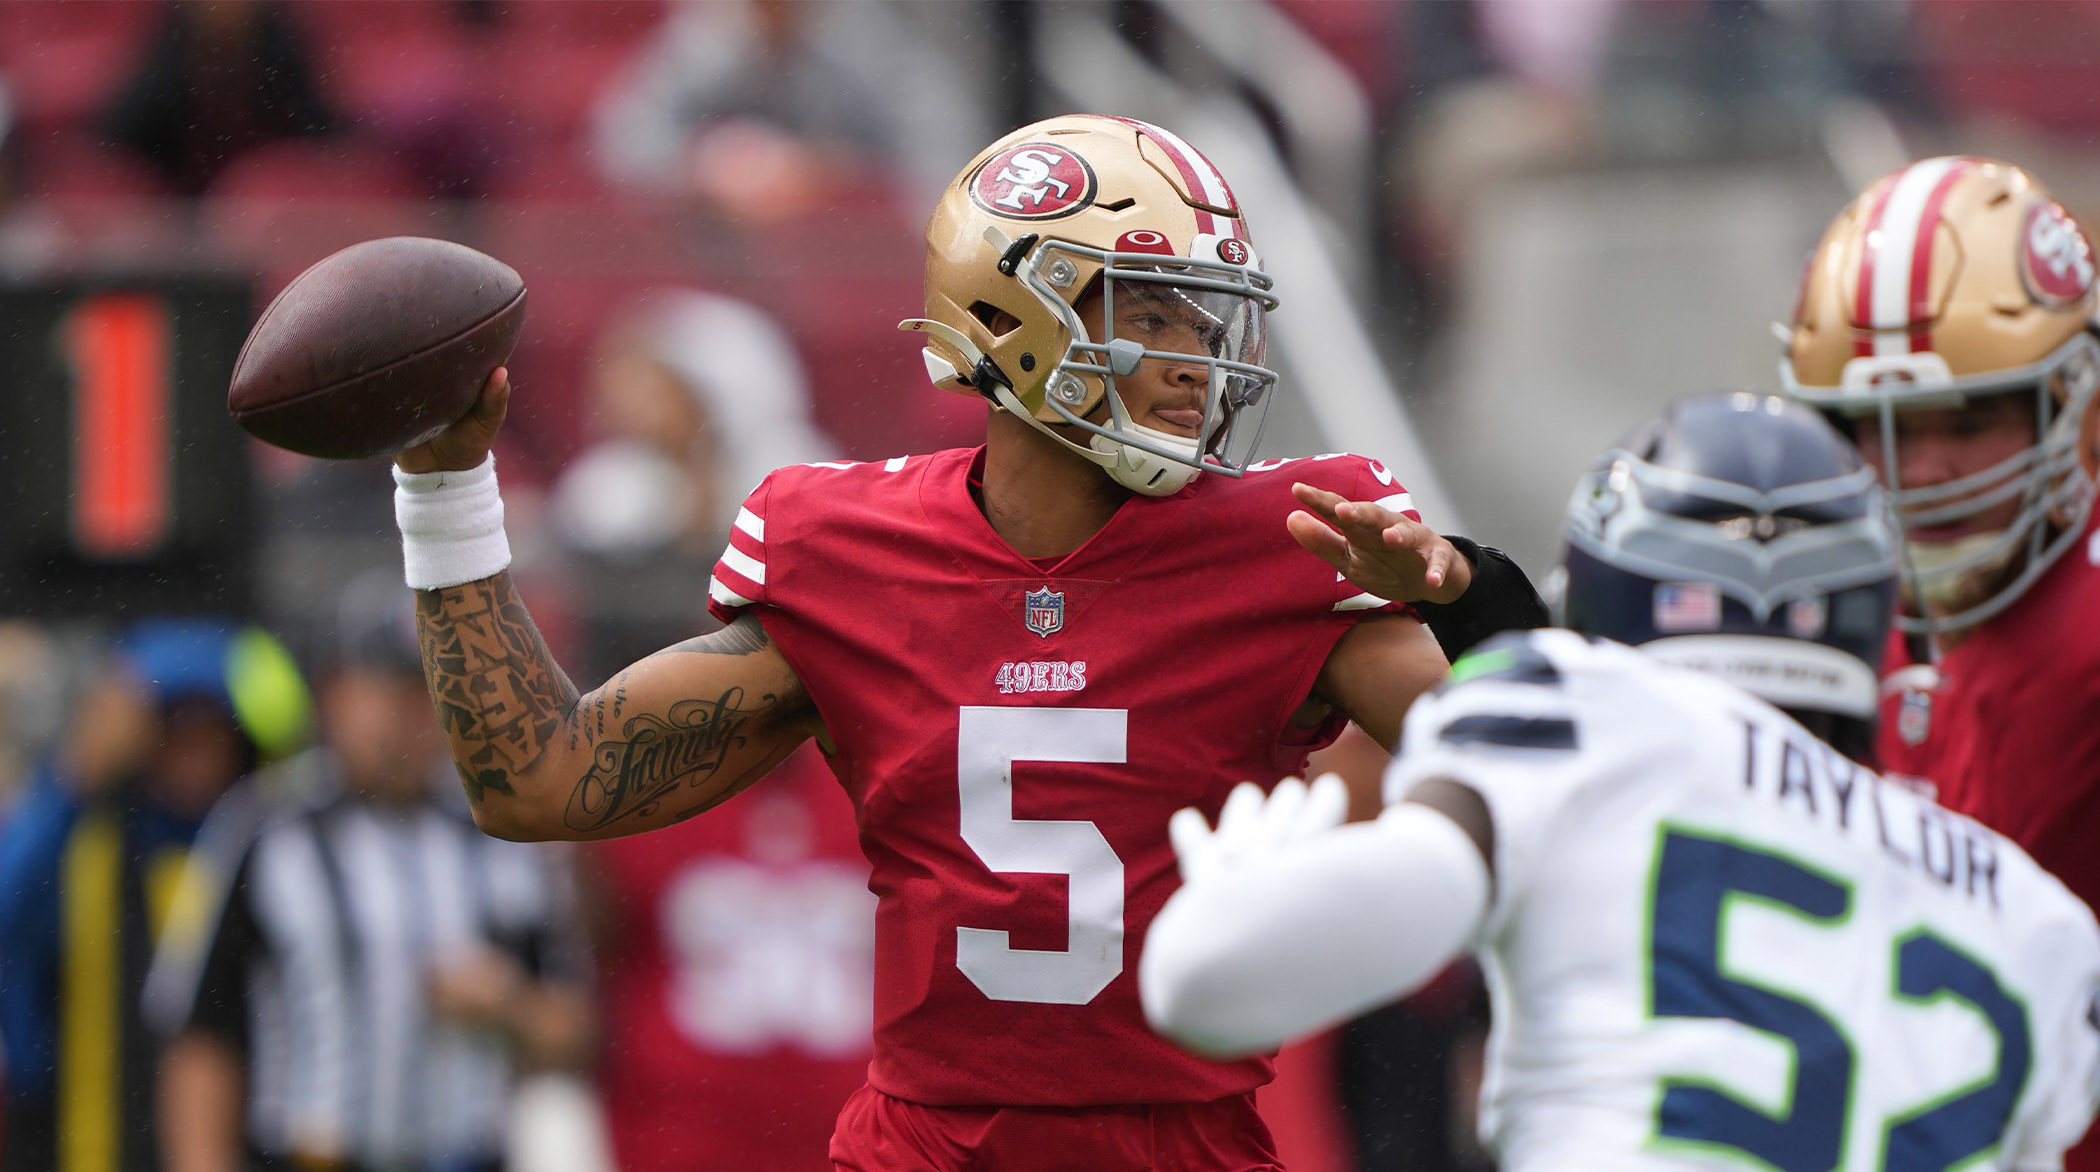 49ers' Trey Lance Carted Off After Injury vs. Seahawks - Sports Illustrated